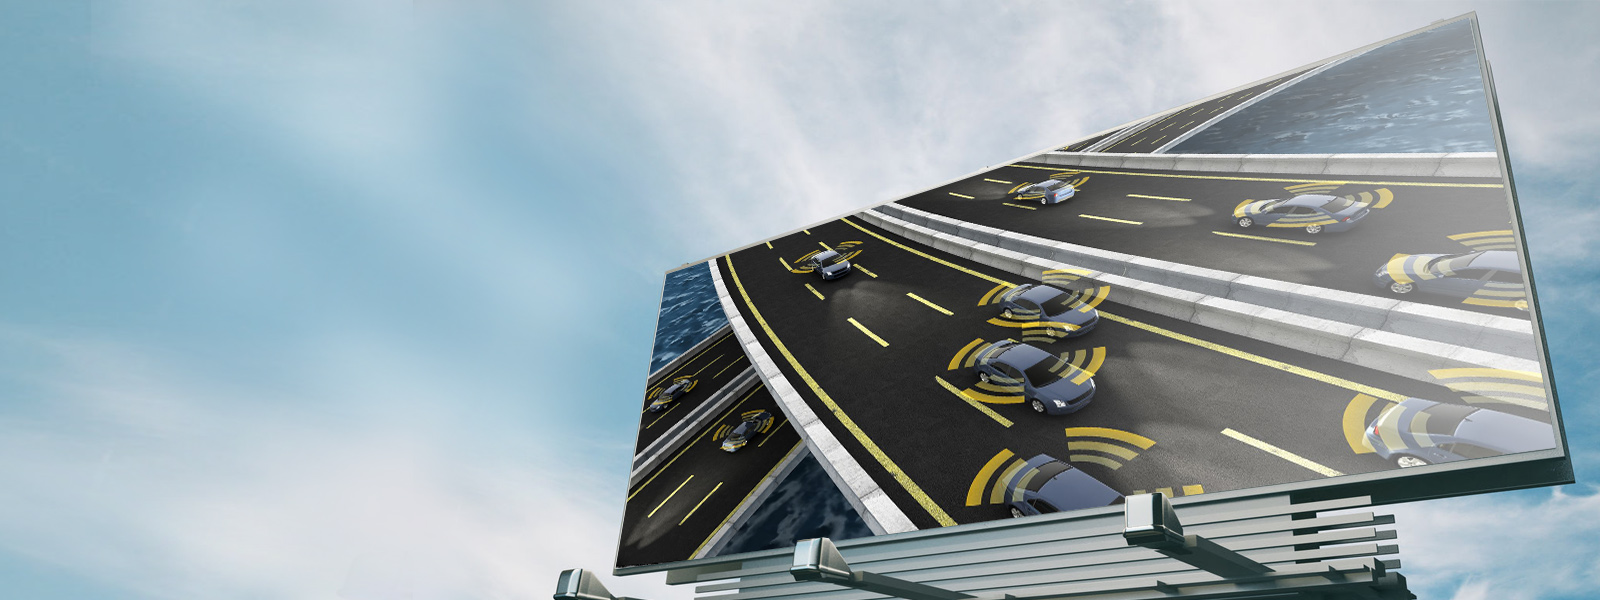 Roadside billboard featuring self-driving cars driving on highway